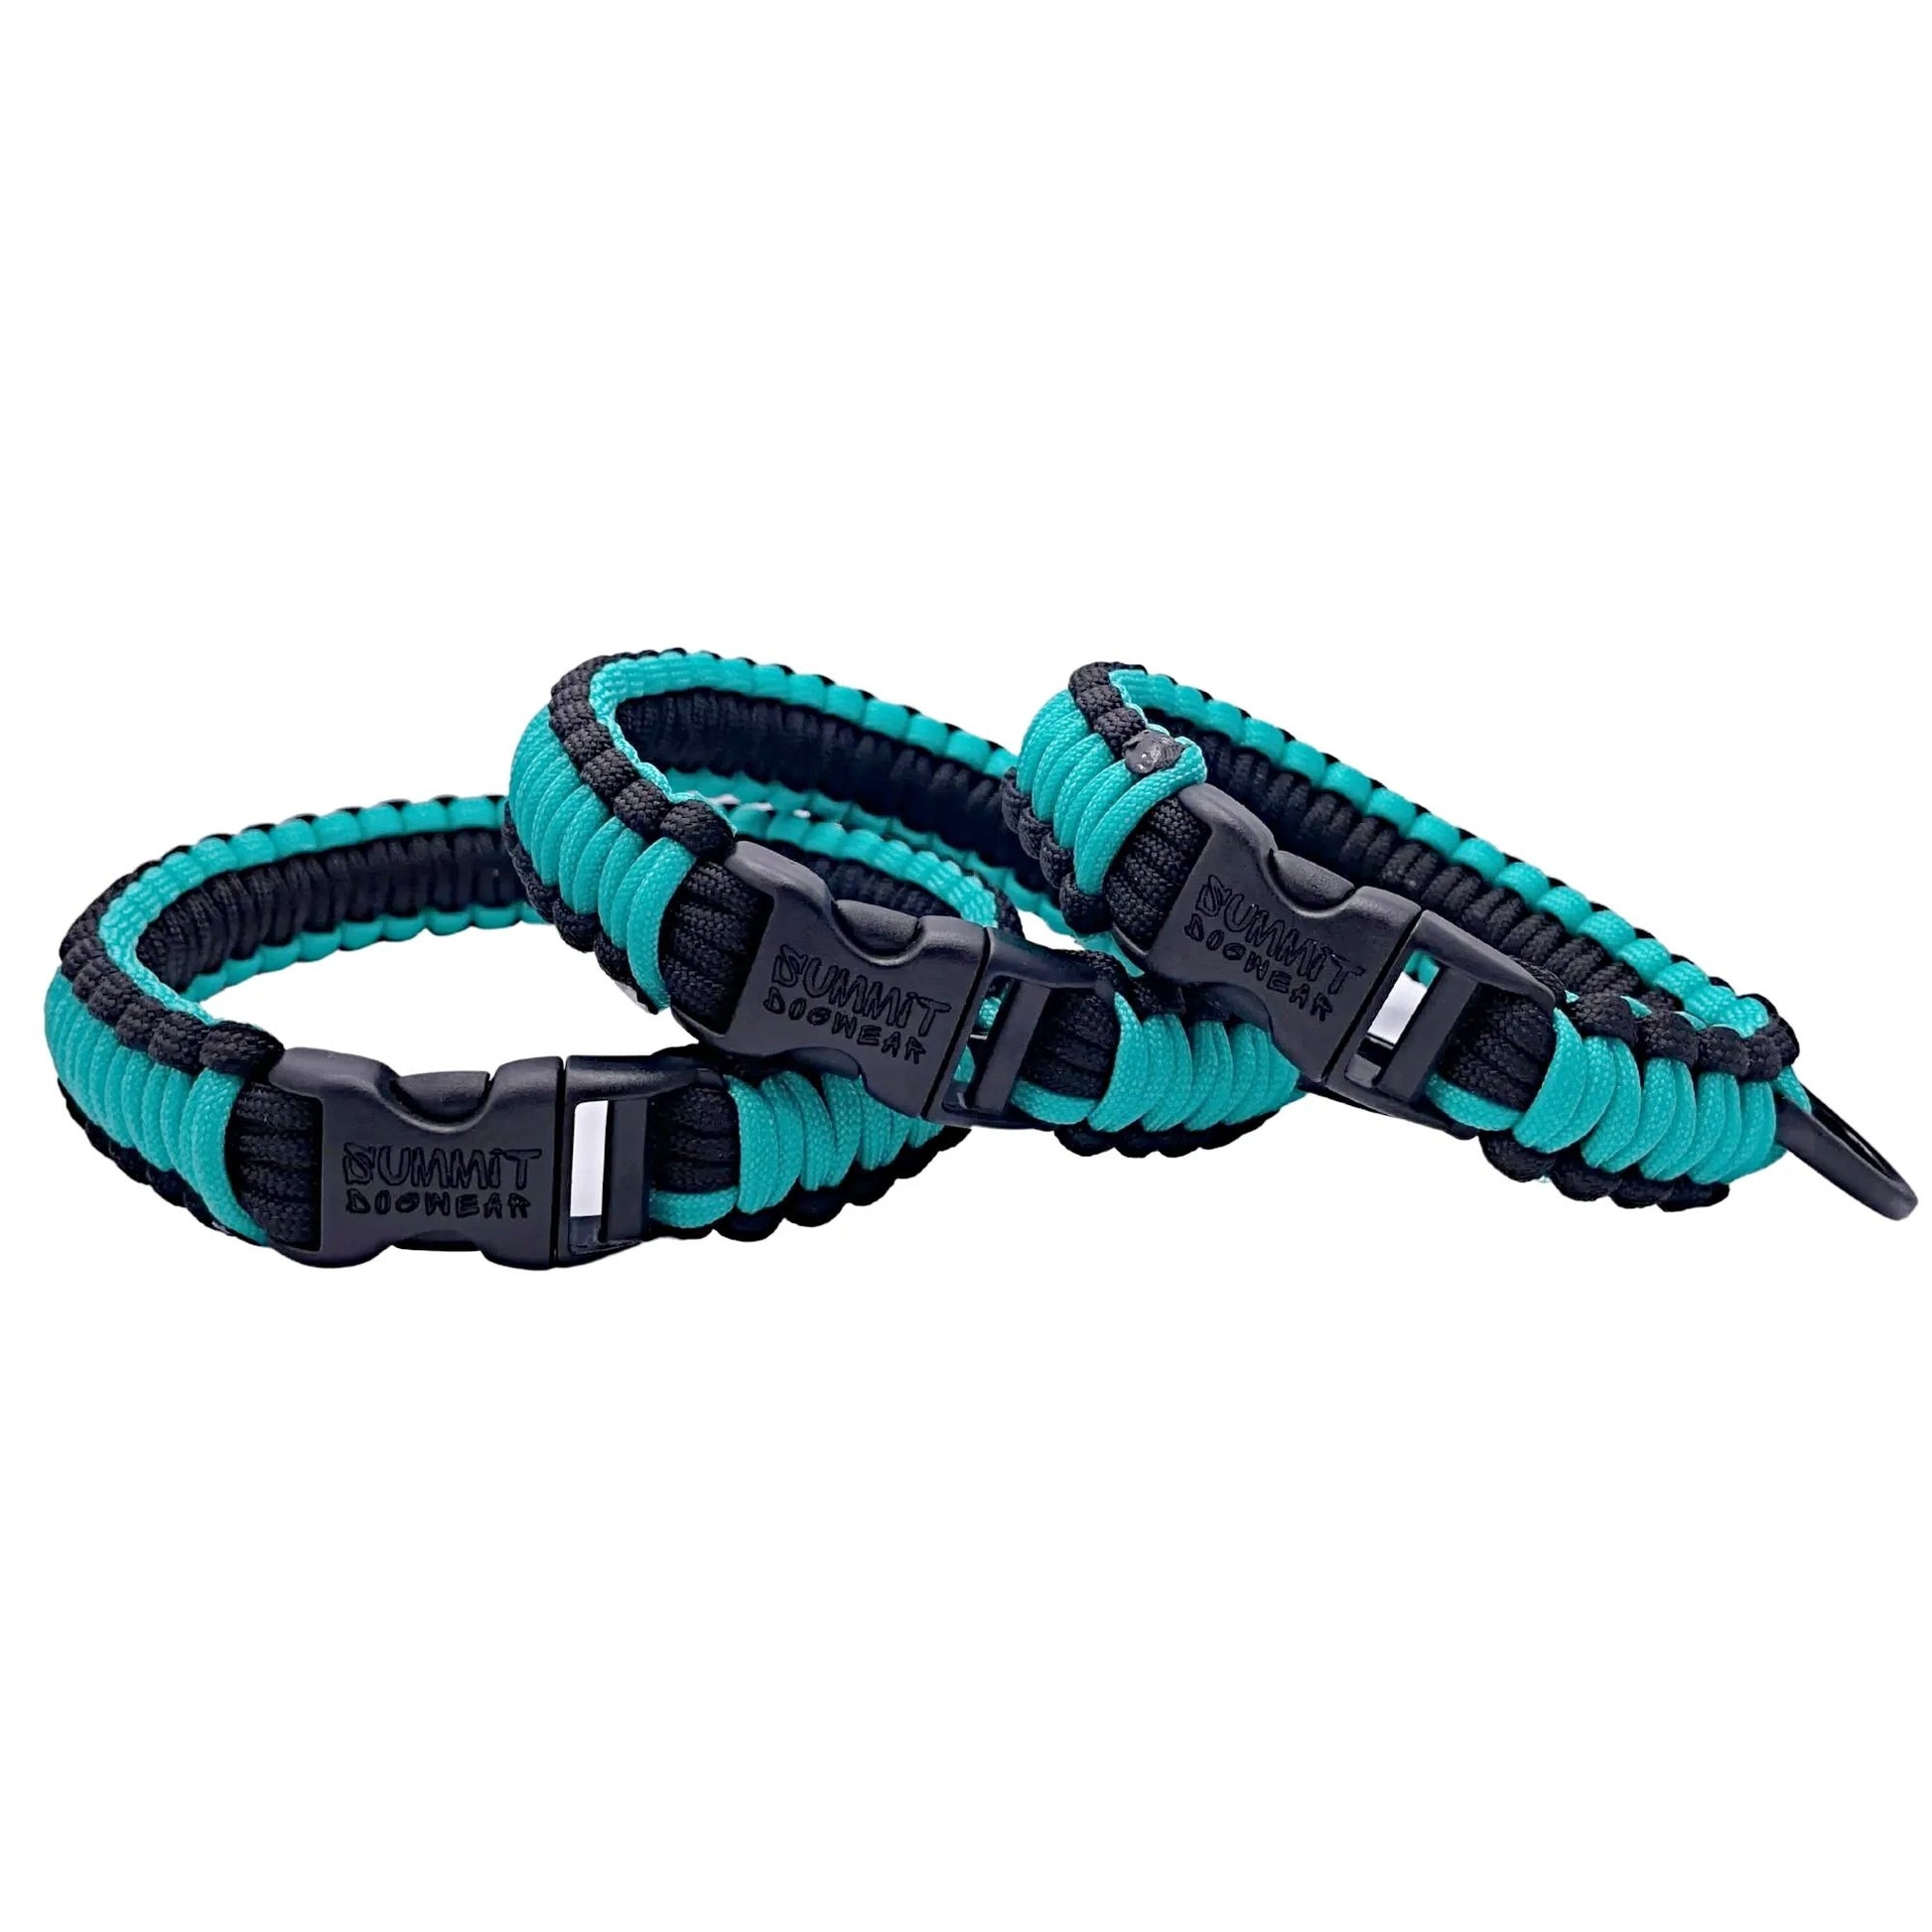 Stylish and Durable Paracord Collar for Small Dogs and Pups!